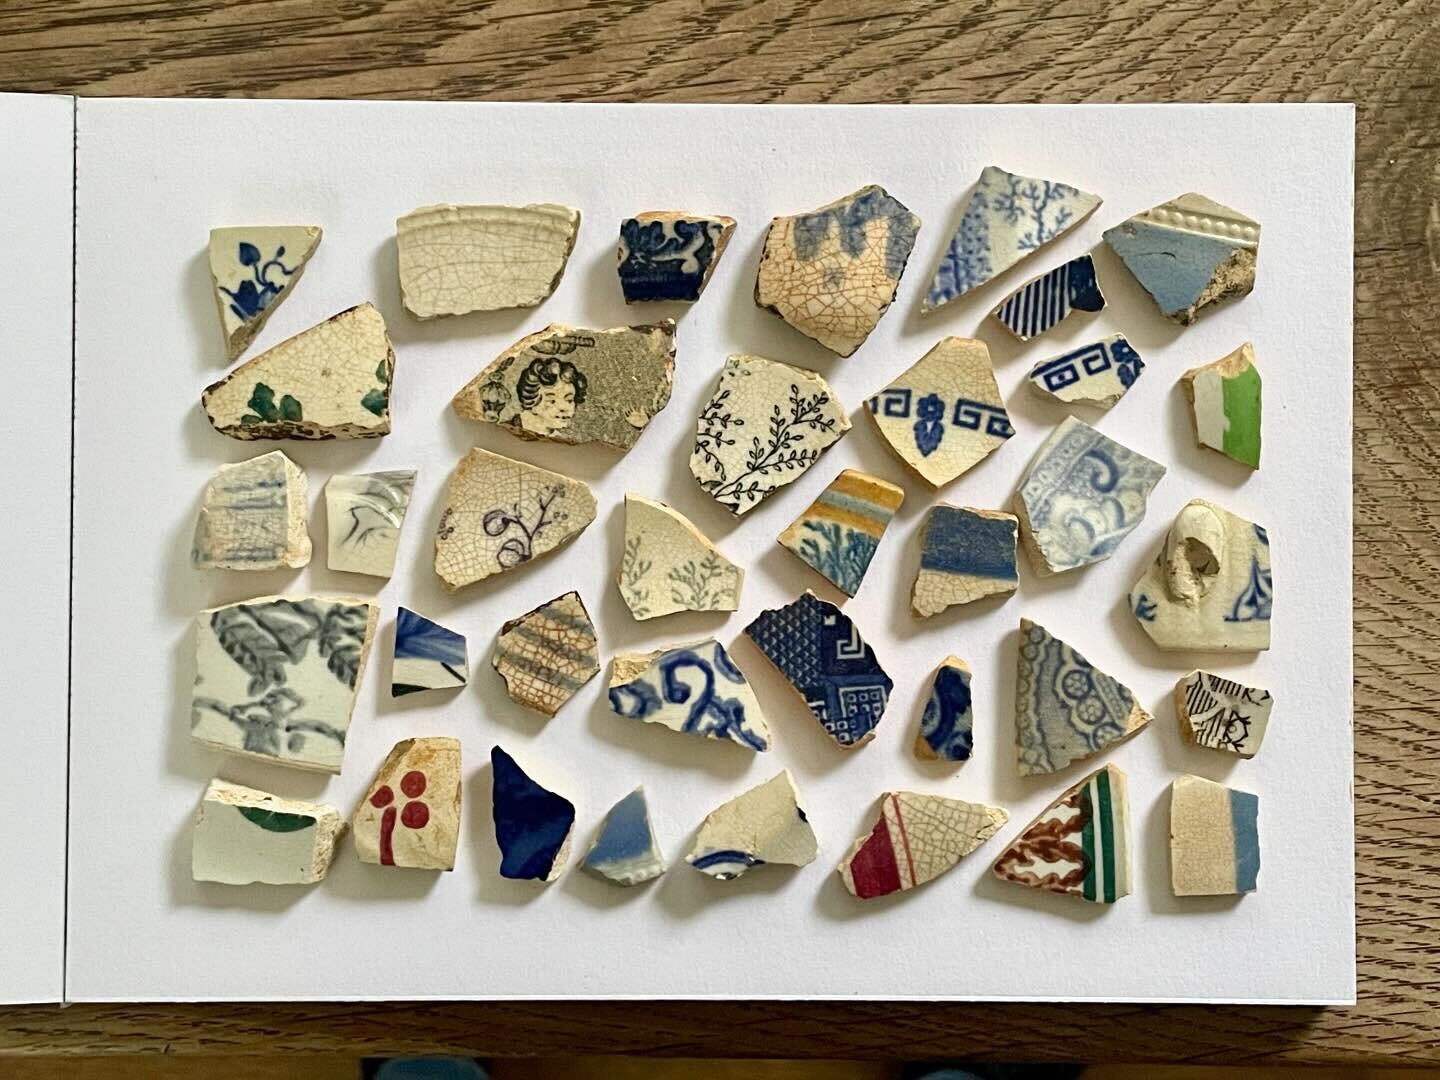 A very exciting gifts of sherds from my dear friend Jacqui on Mull. 
Can anyone tell me what they think the pieces in the middle three pics are? I&rsquo;m especially intrigued by the woman&rsquo;s head.
The final pic is the beautiful bay on Mull wher